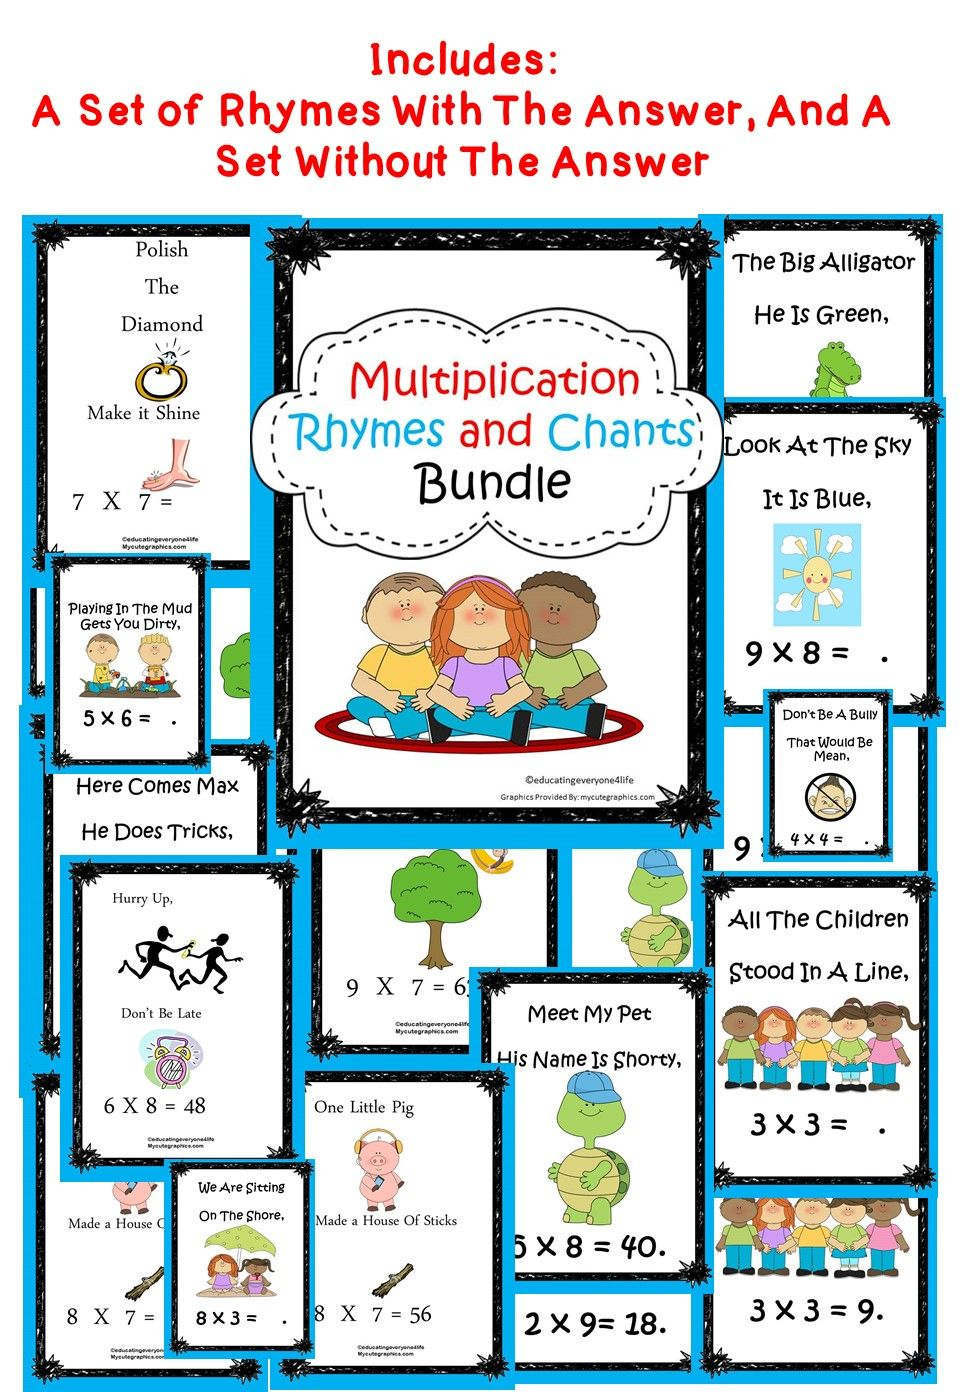 Multiplication Rhymes And Chants | Math Classroom regarding Free Printable Multiplication Rhymes